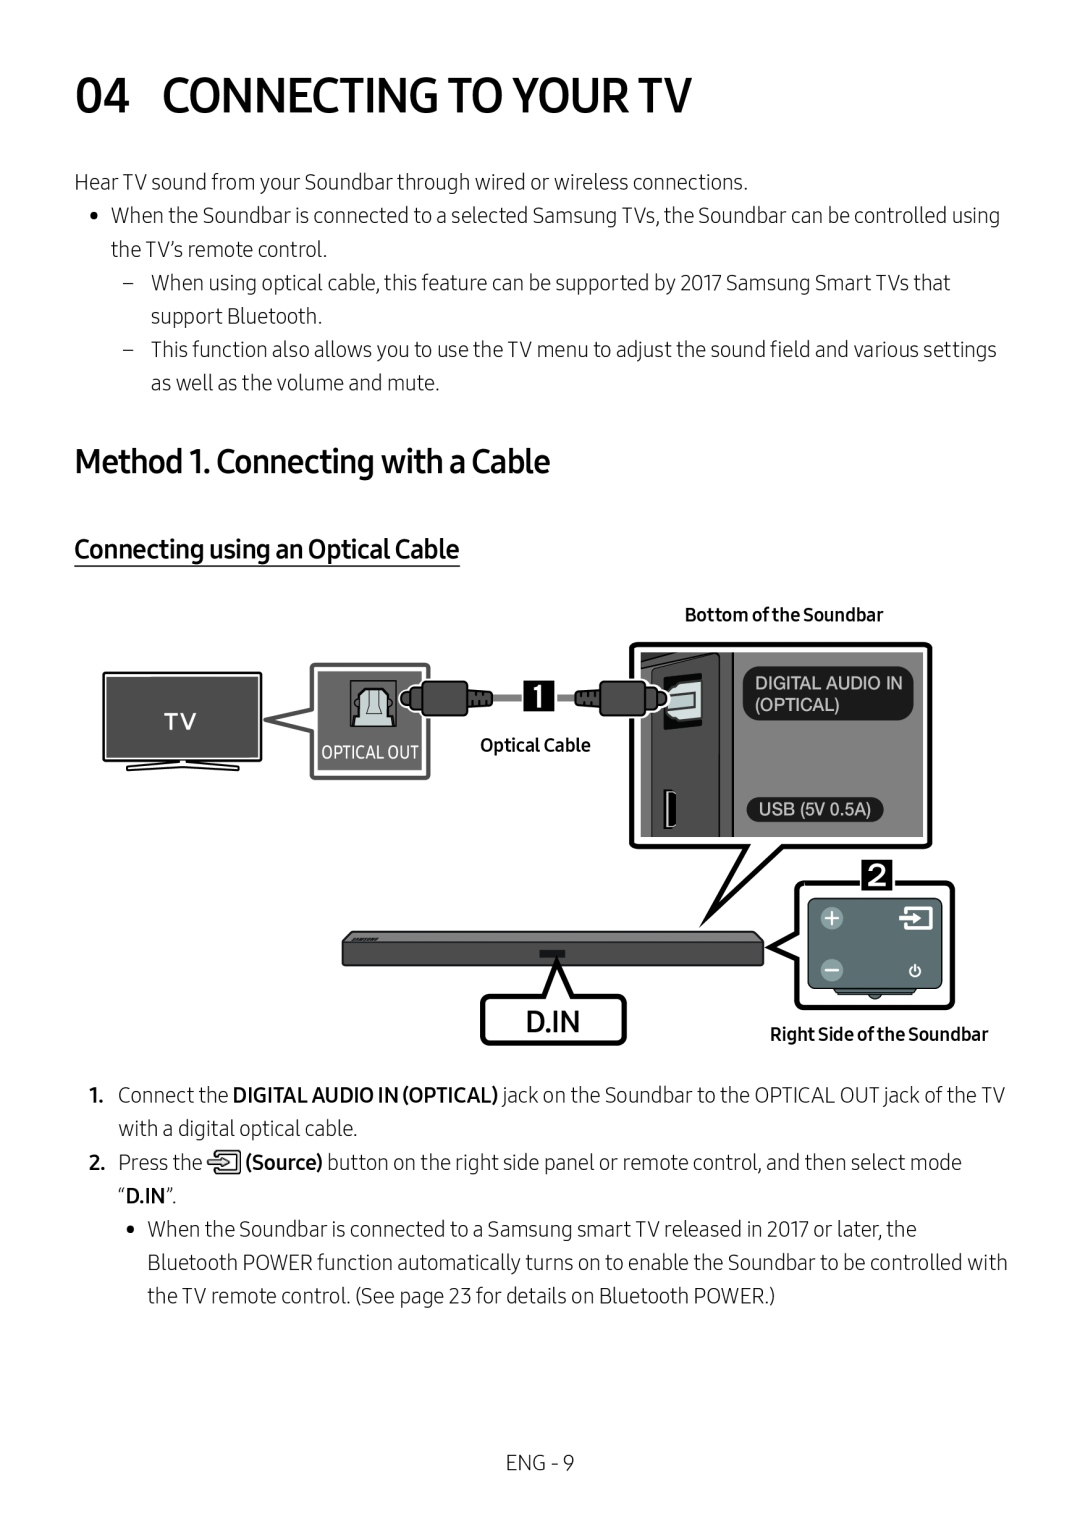 Samsung HW-M450/ZG manual Connecting To Your Tv, Method 1. Connecting with a Cable, D.In, Connecting using an Optical Cable 